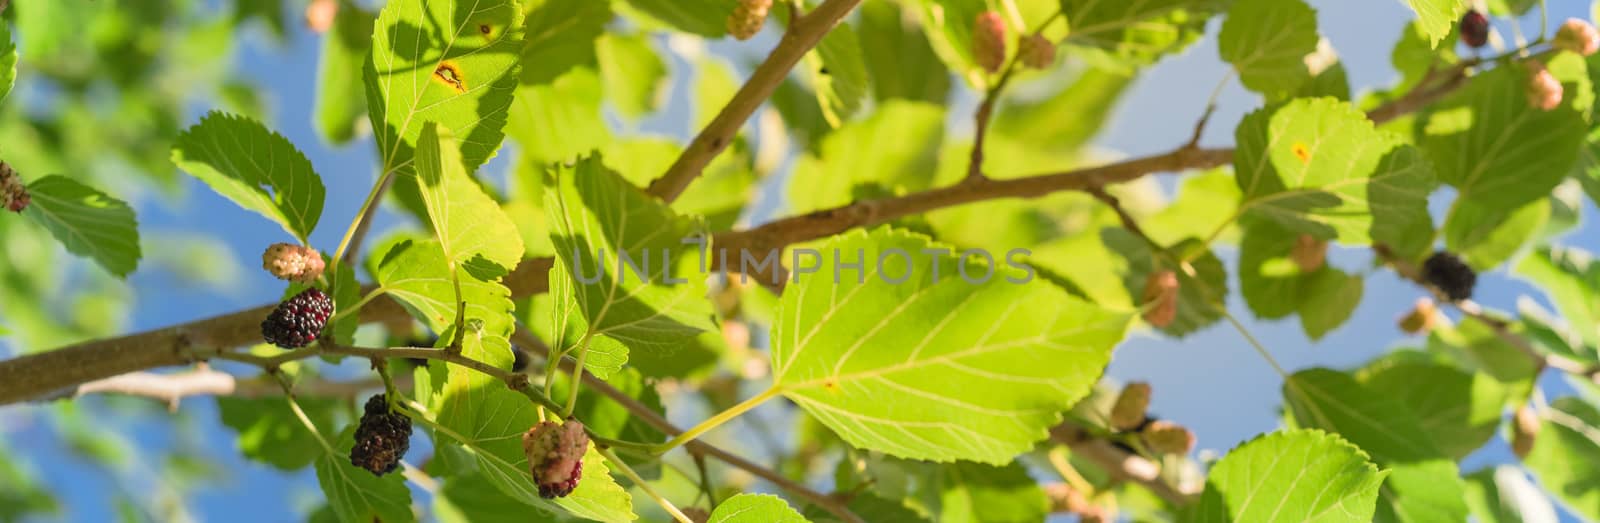 Panoramic ripe mulberry fruits on tree ready to harvest in Texas, USA by trongnguyen